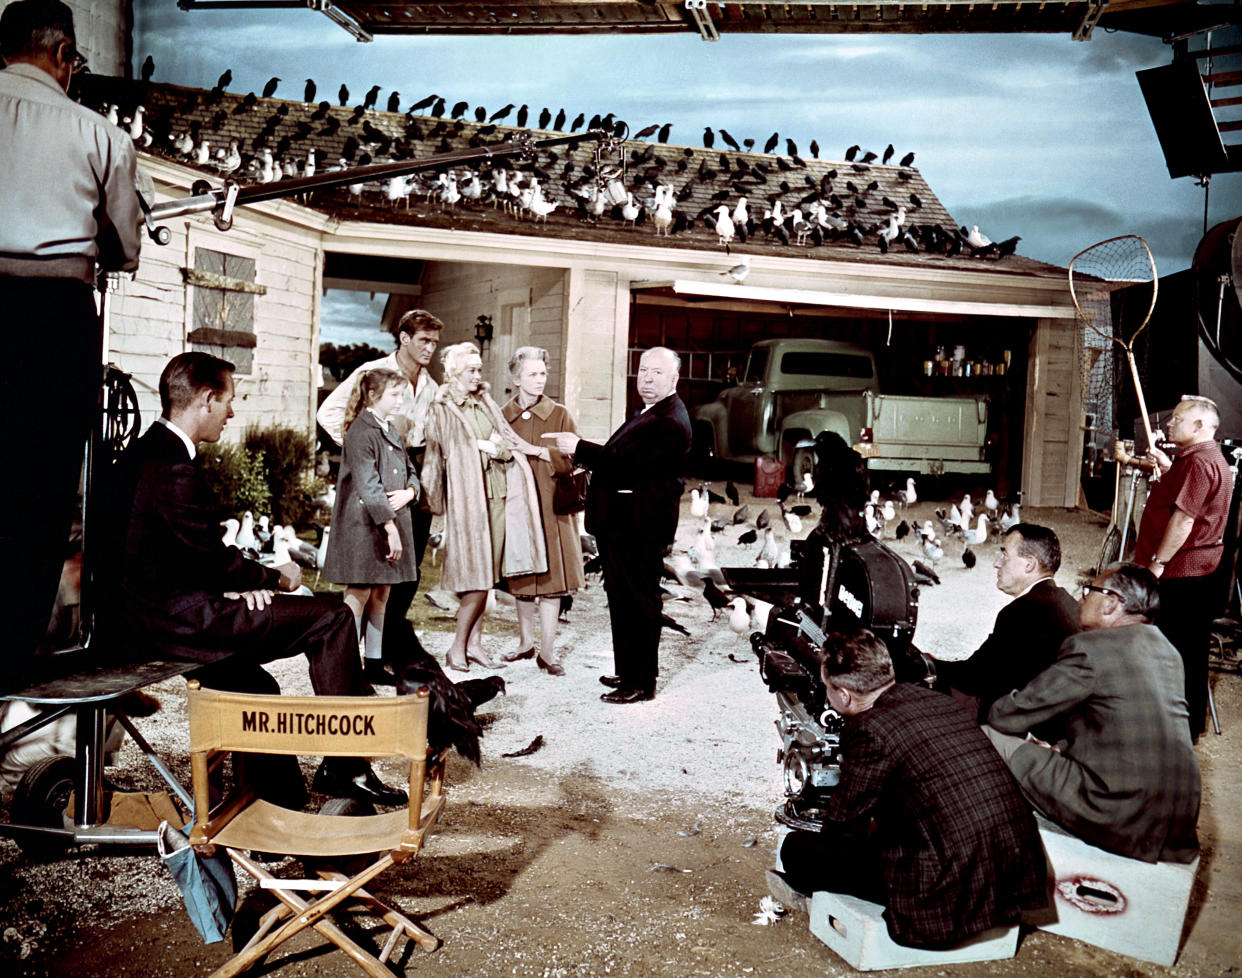 British actress Veronica Cartwright, Australian actor Rod Taylor, American actress Tippi Hedren and British Jessica Tandy with director and producer Alfred Hitchcock on the set of Hitchcock's movie The Birds. (Photo by Universal Pictures/Sunset Boulevard/Corbis via Getty Images)